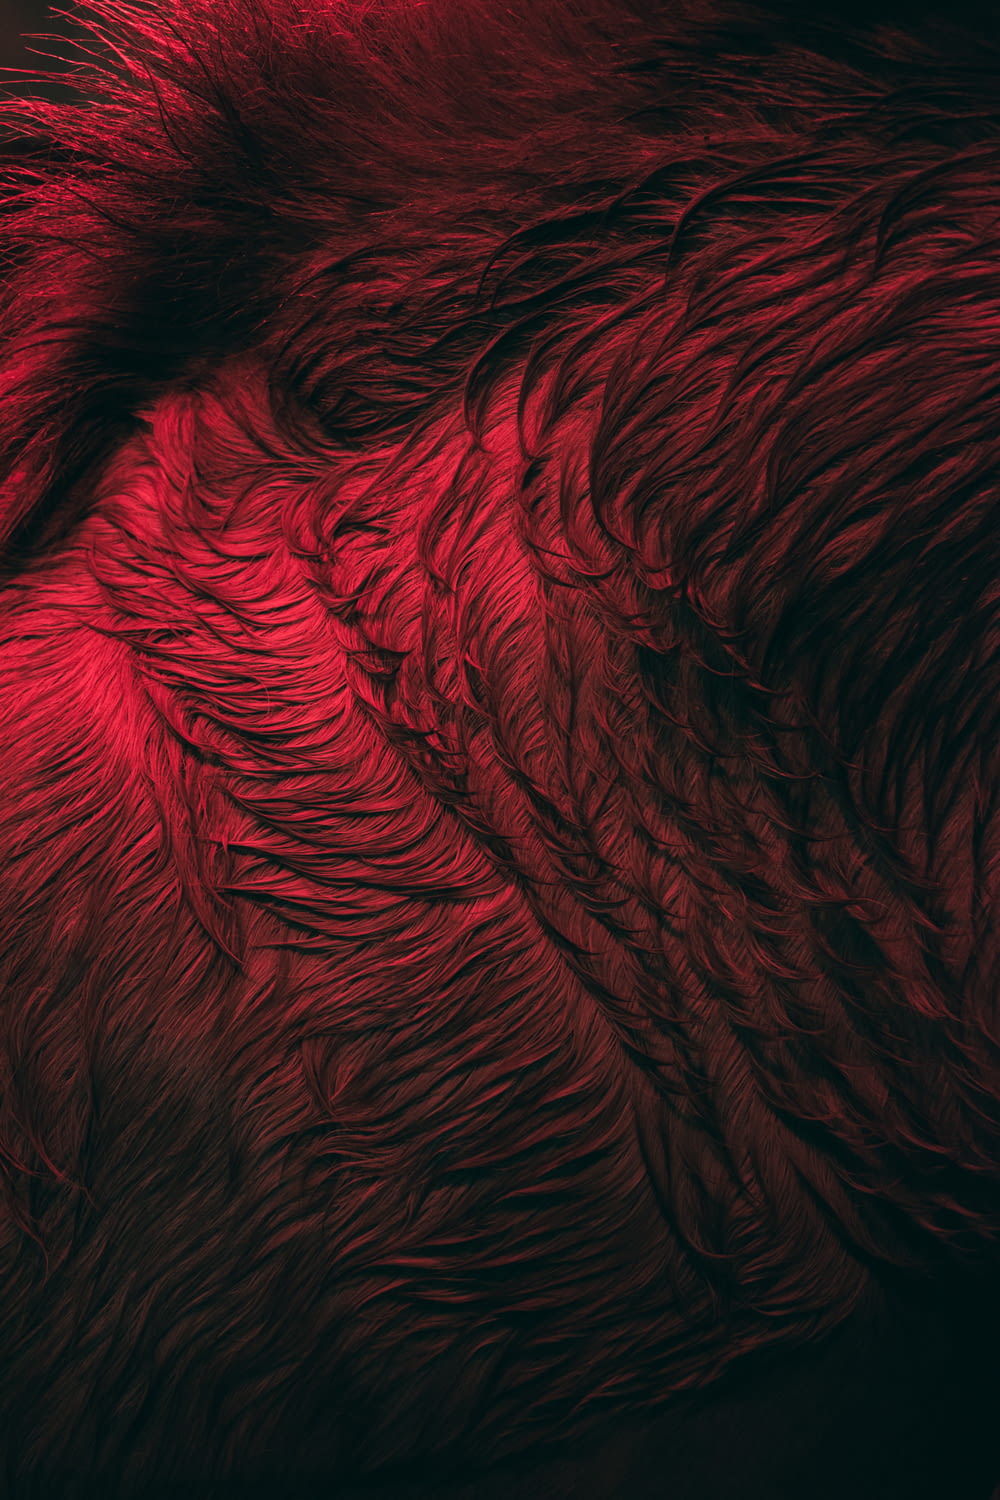 a close up of a red animal's fur